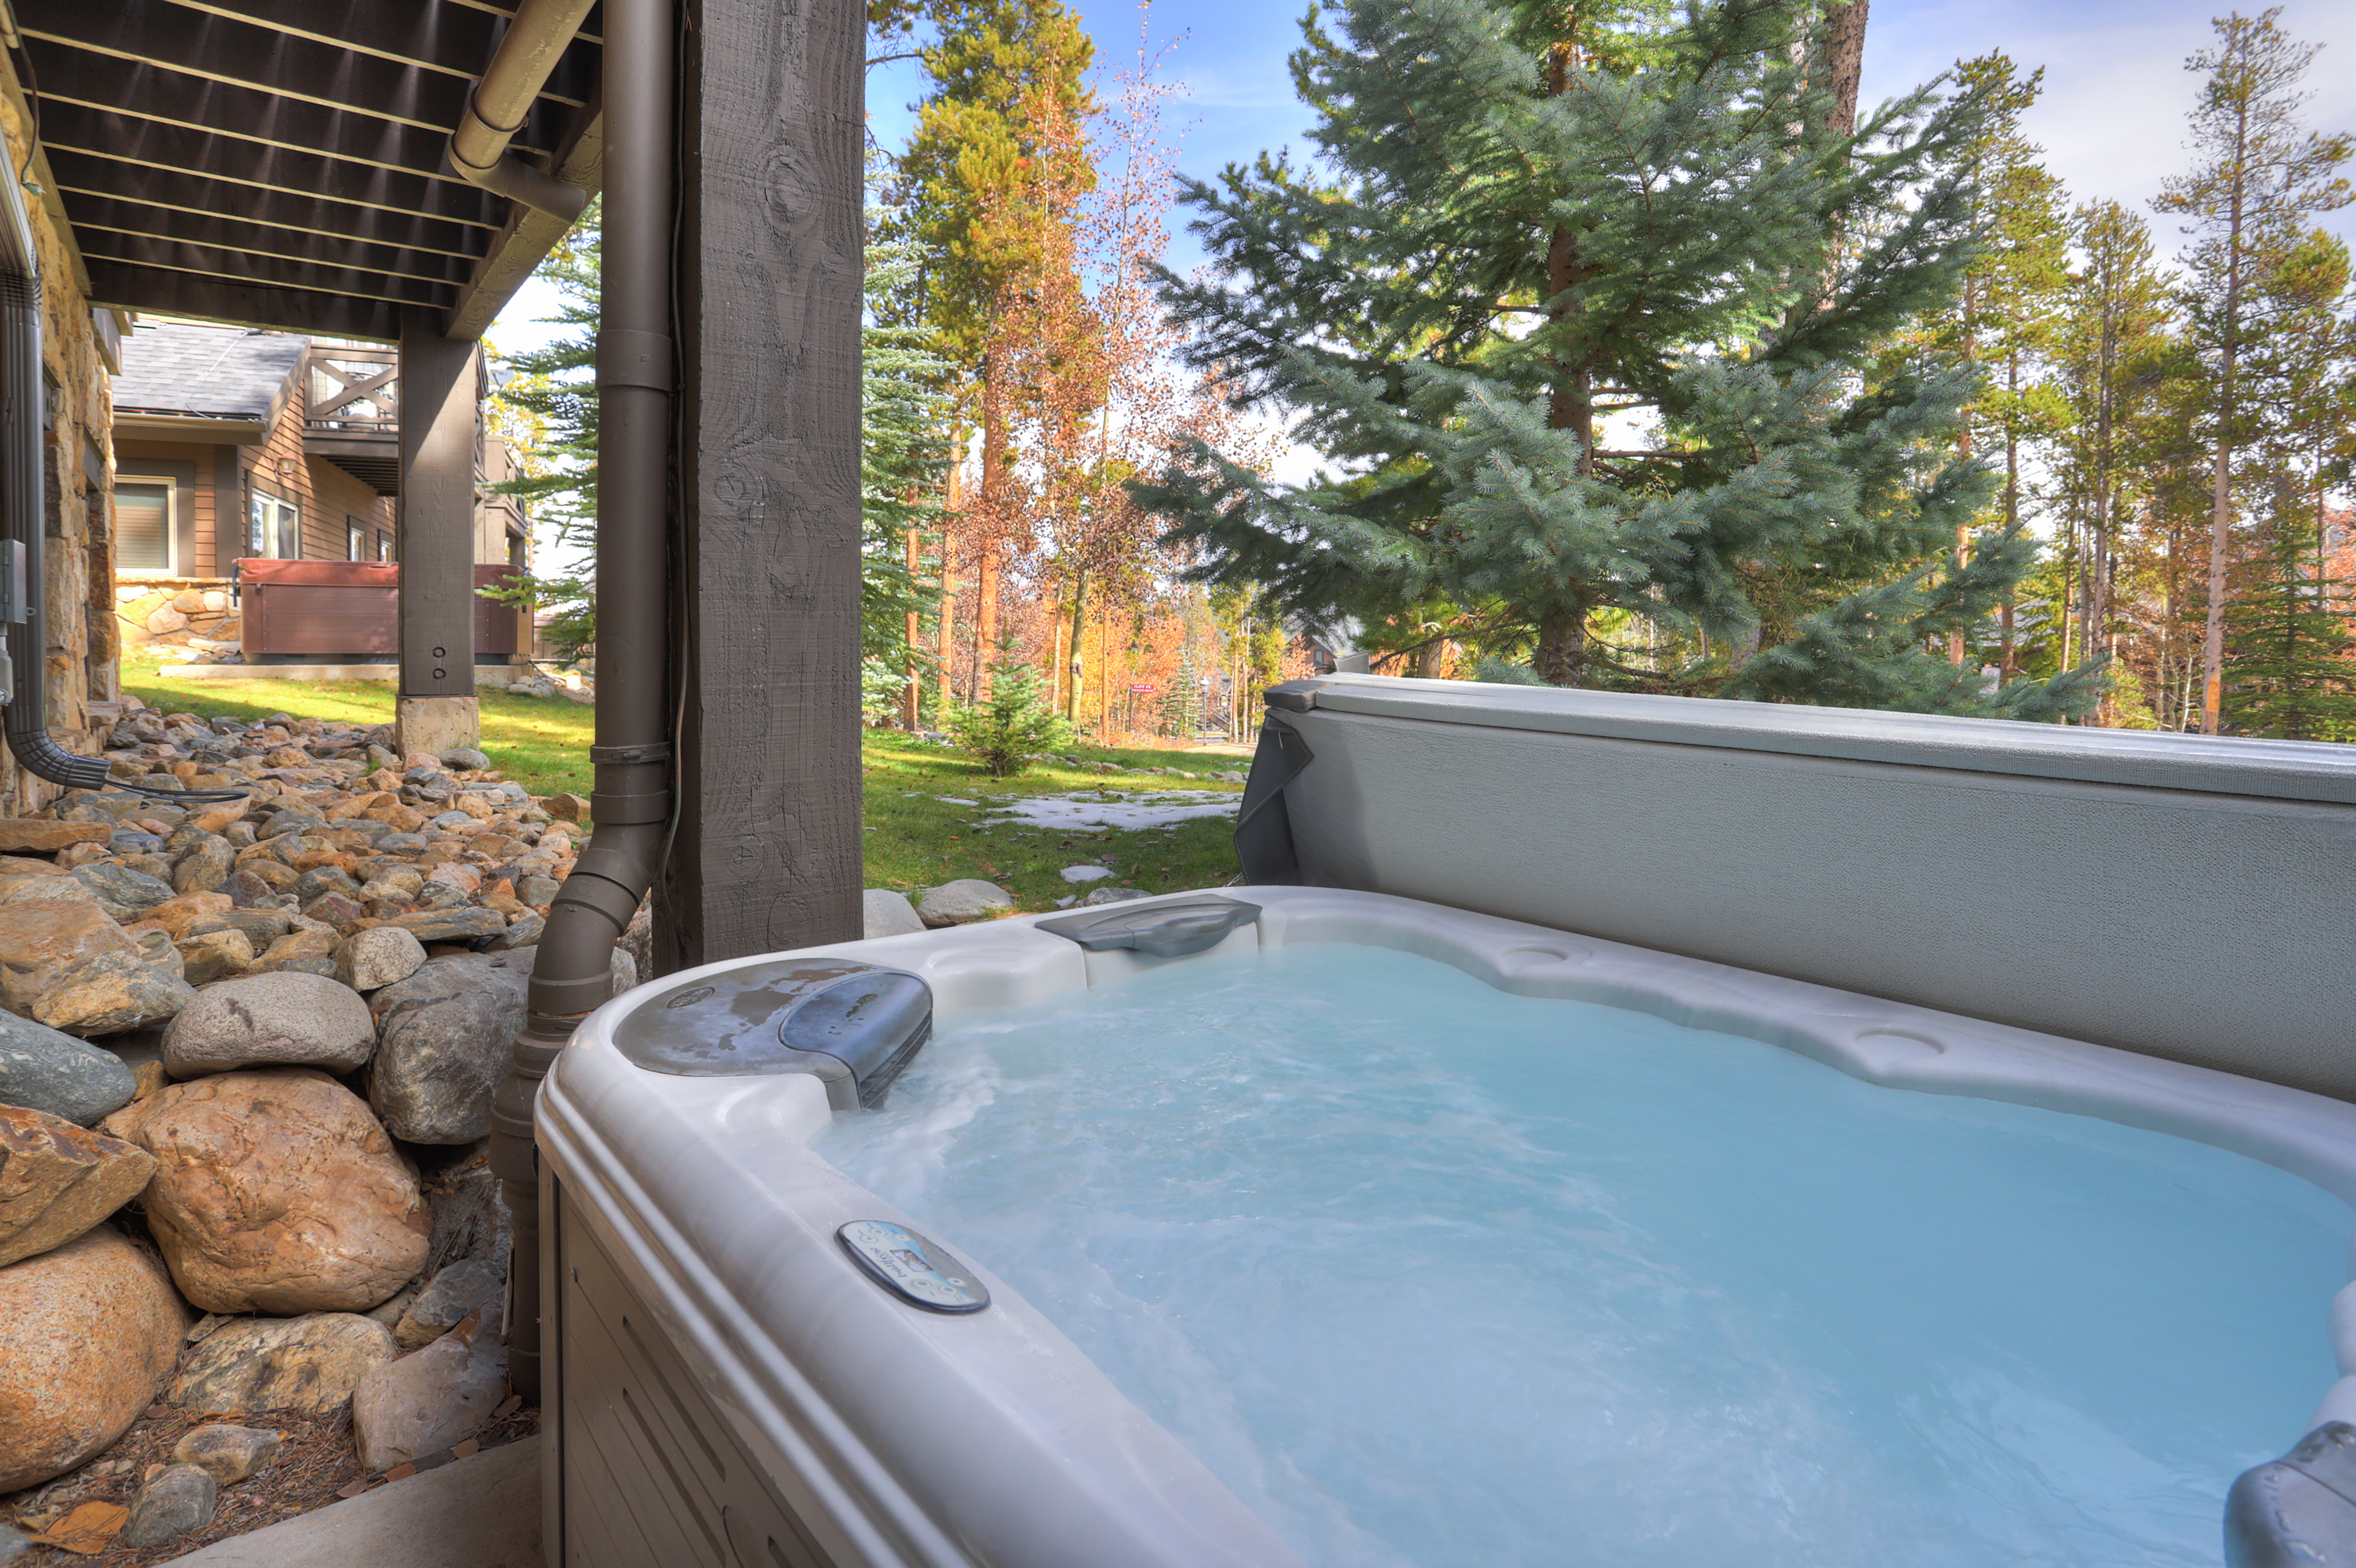 Additional view of the hot tub - Amber Sky Breckenridge Vacation Rental